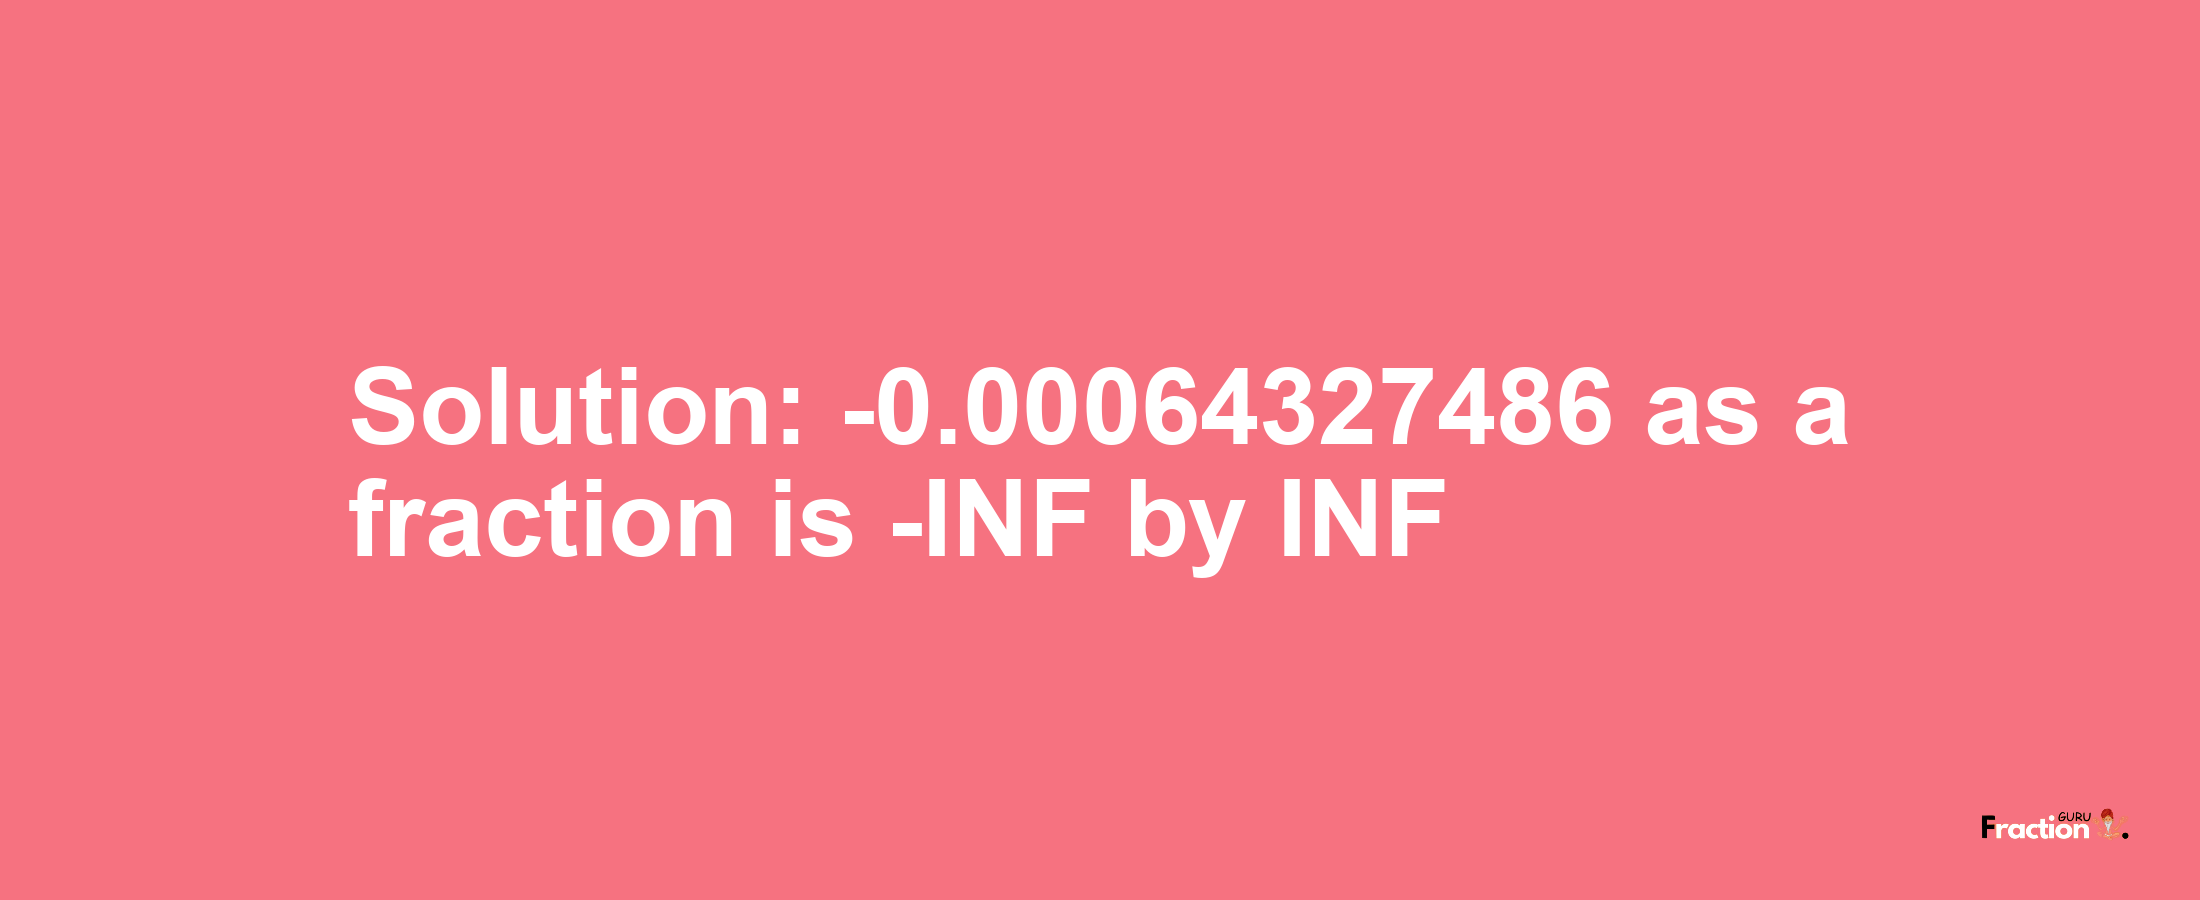 Solution:-0.00064327486 as a fraction is -INF/INF